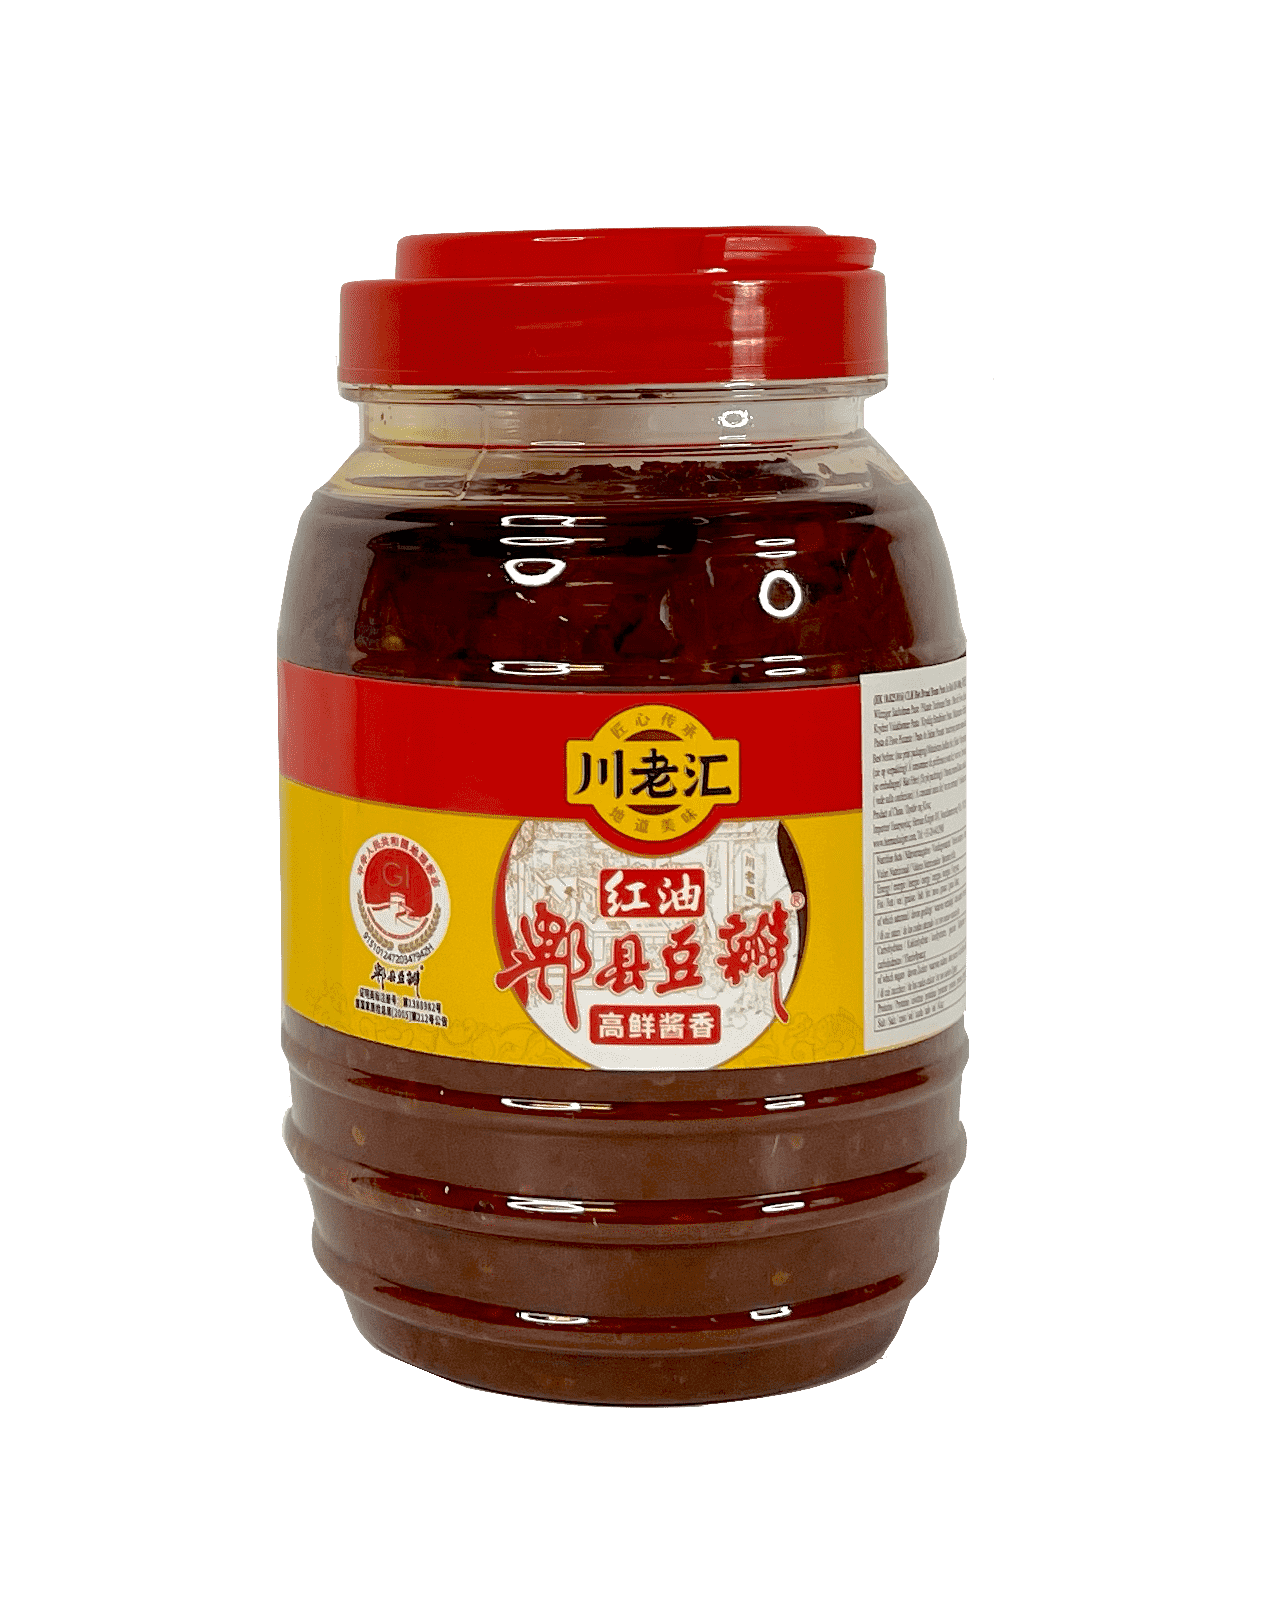 Soybean Sauce Chili in Oil 1000g CLH China